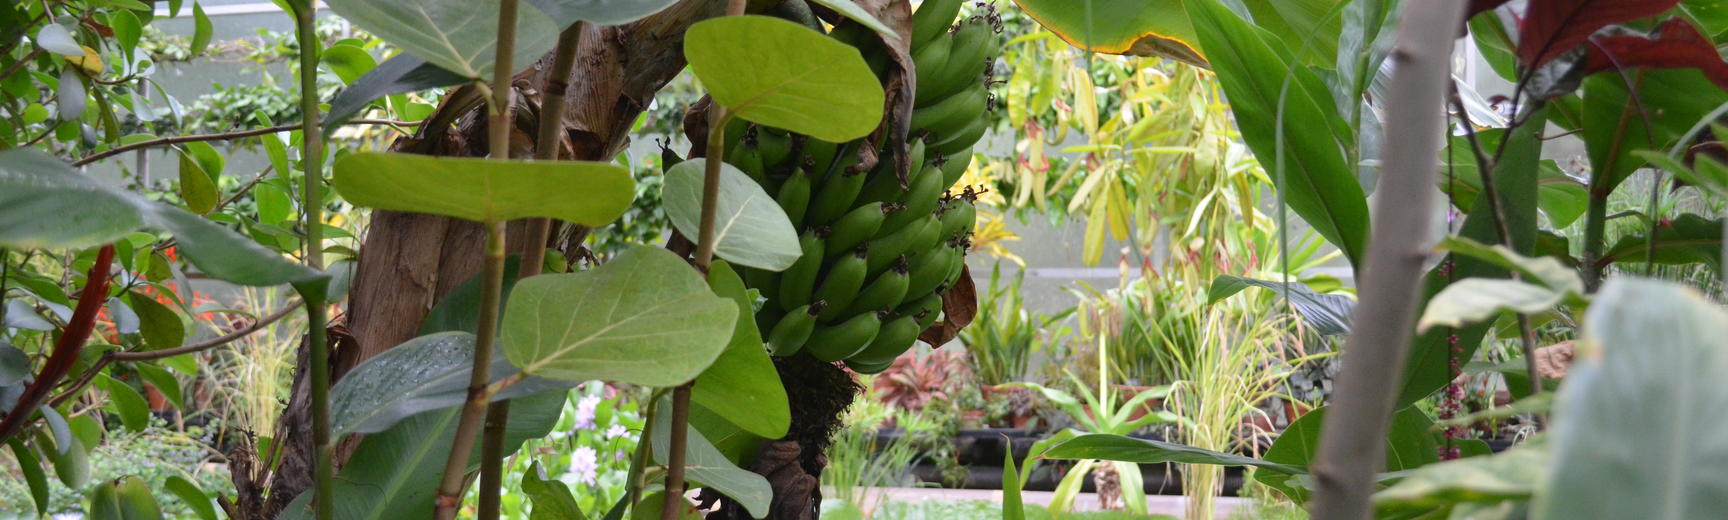 Bananas in the Lily House